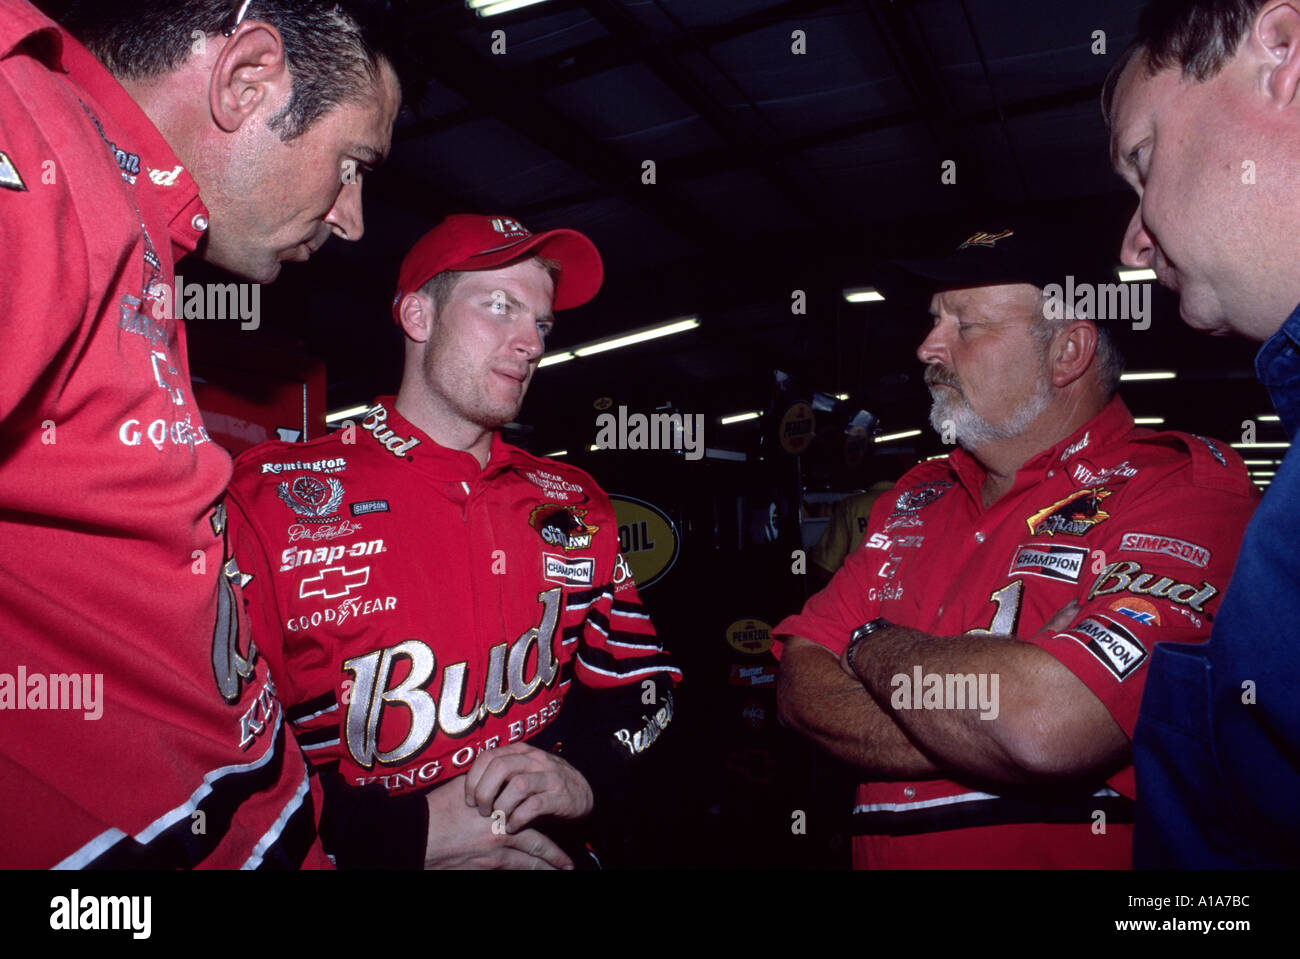 Dale Earnhardt Junior with crew at Chicagoland Speedway 2001 Stock Photo